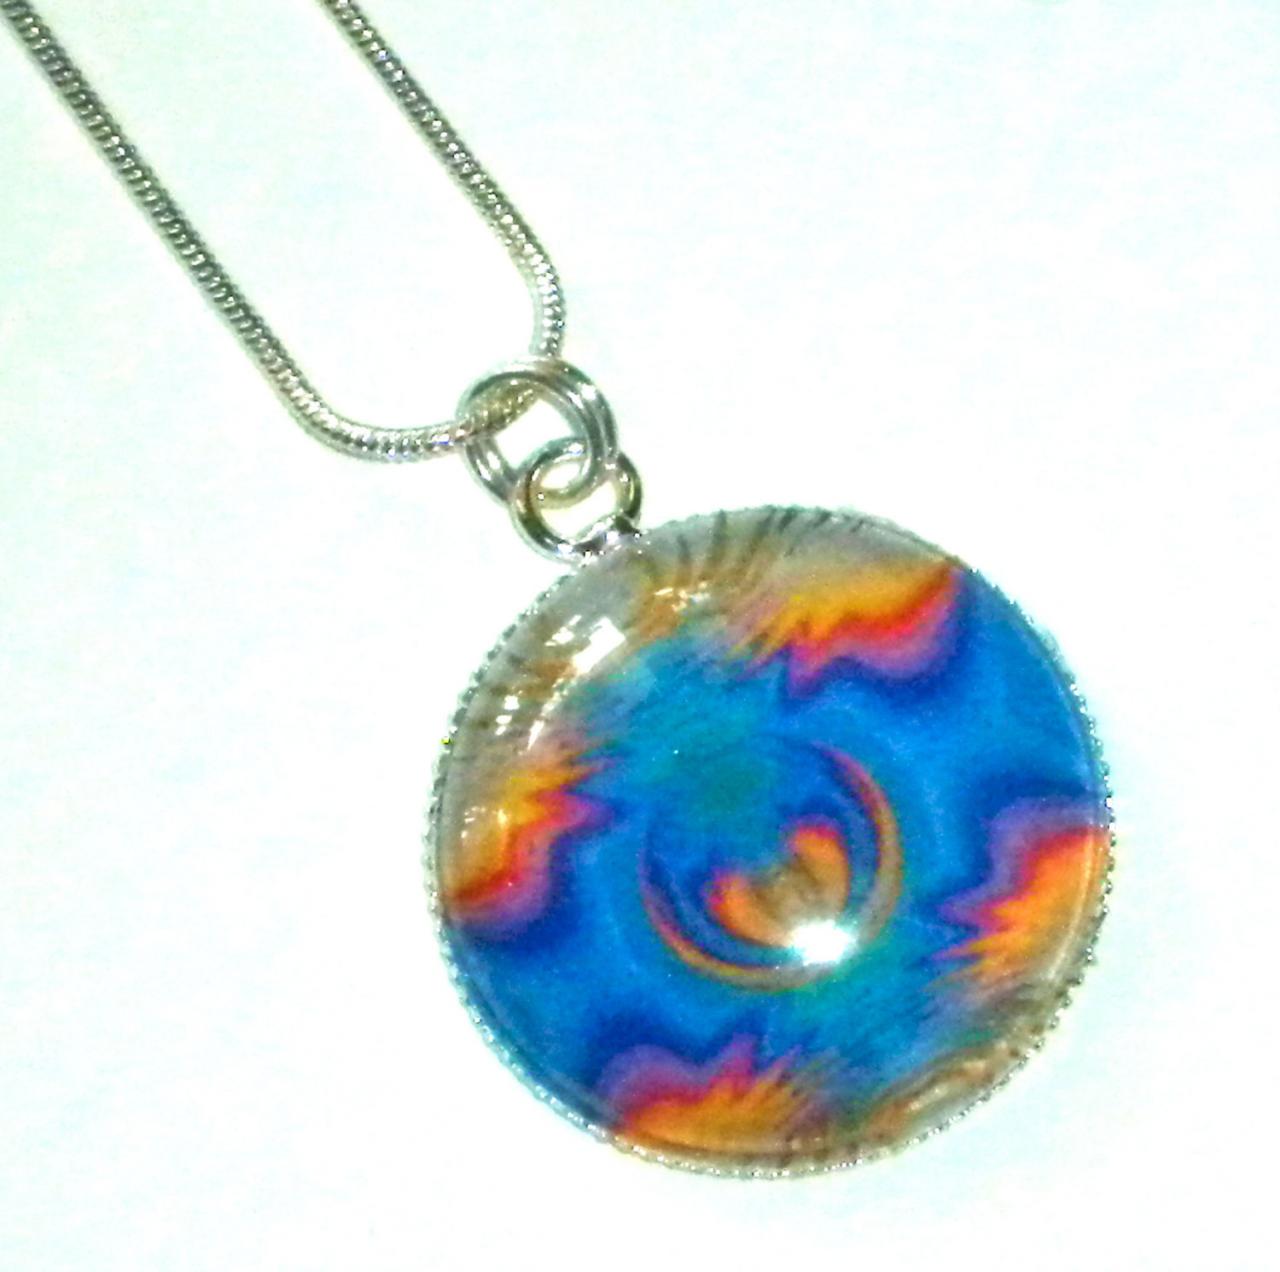 Glass Pendant Necklace - 1" Circle - Bright Abstract Southwest Indian Design